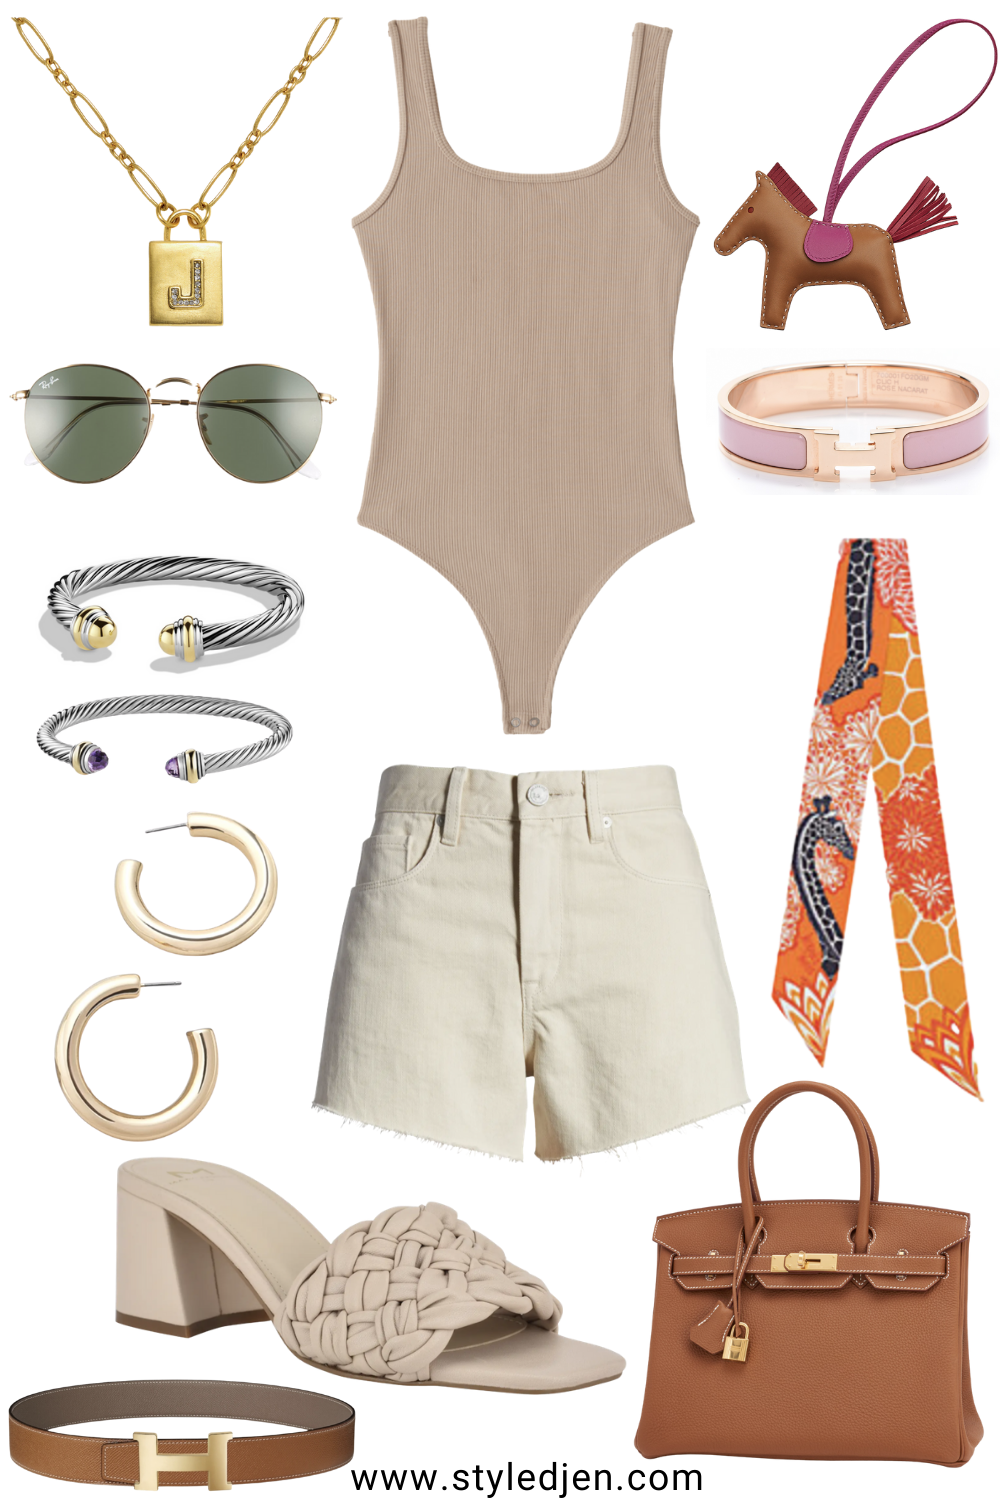 Abercrombie Neutral Summer Outfits